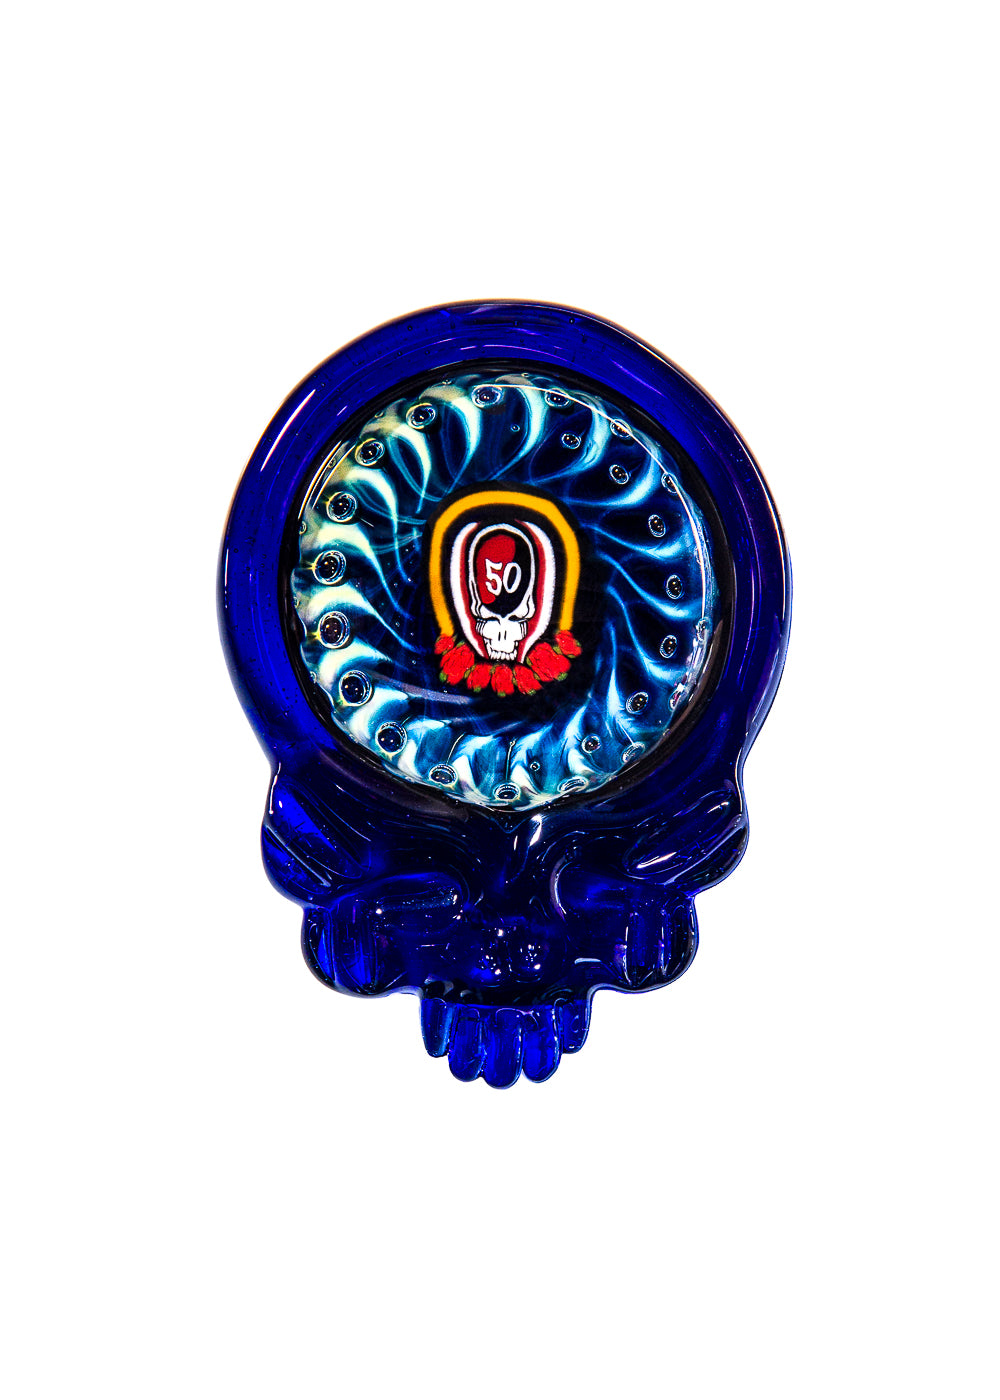 Grateful Dead 50th Anniversary Steal Your Face Air Entrapped Reticello Pendant by Paul Katherman